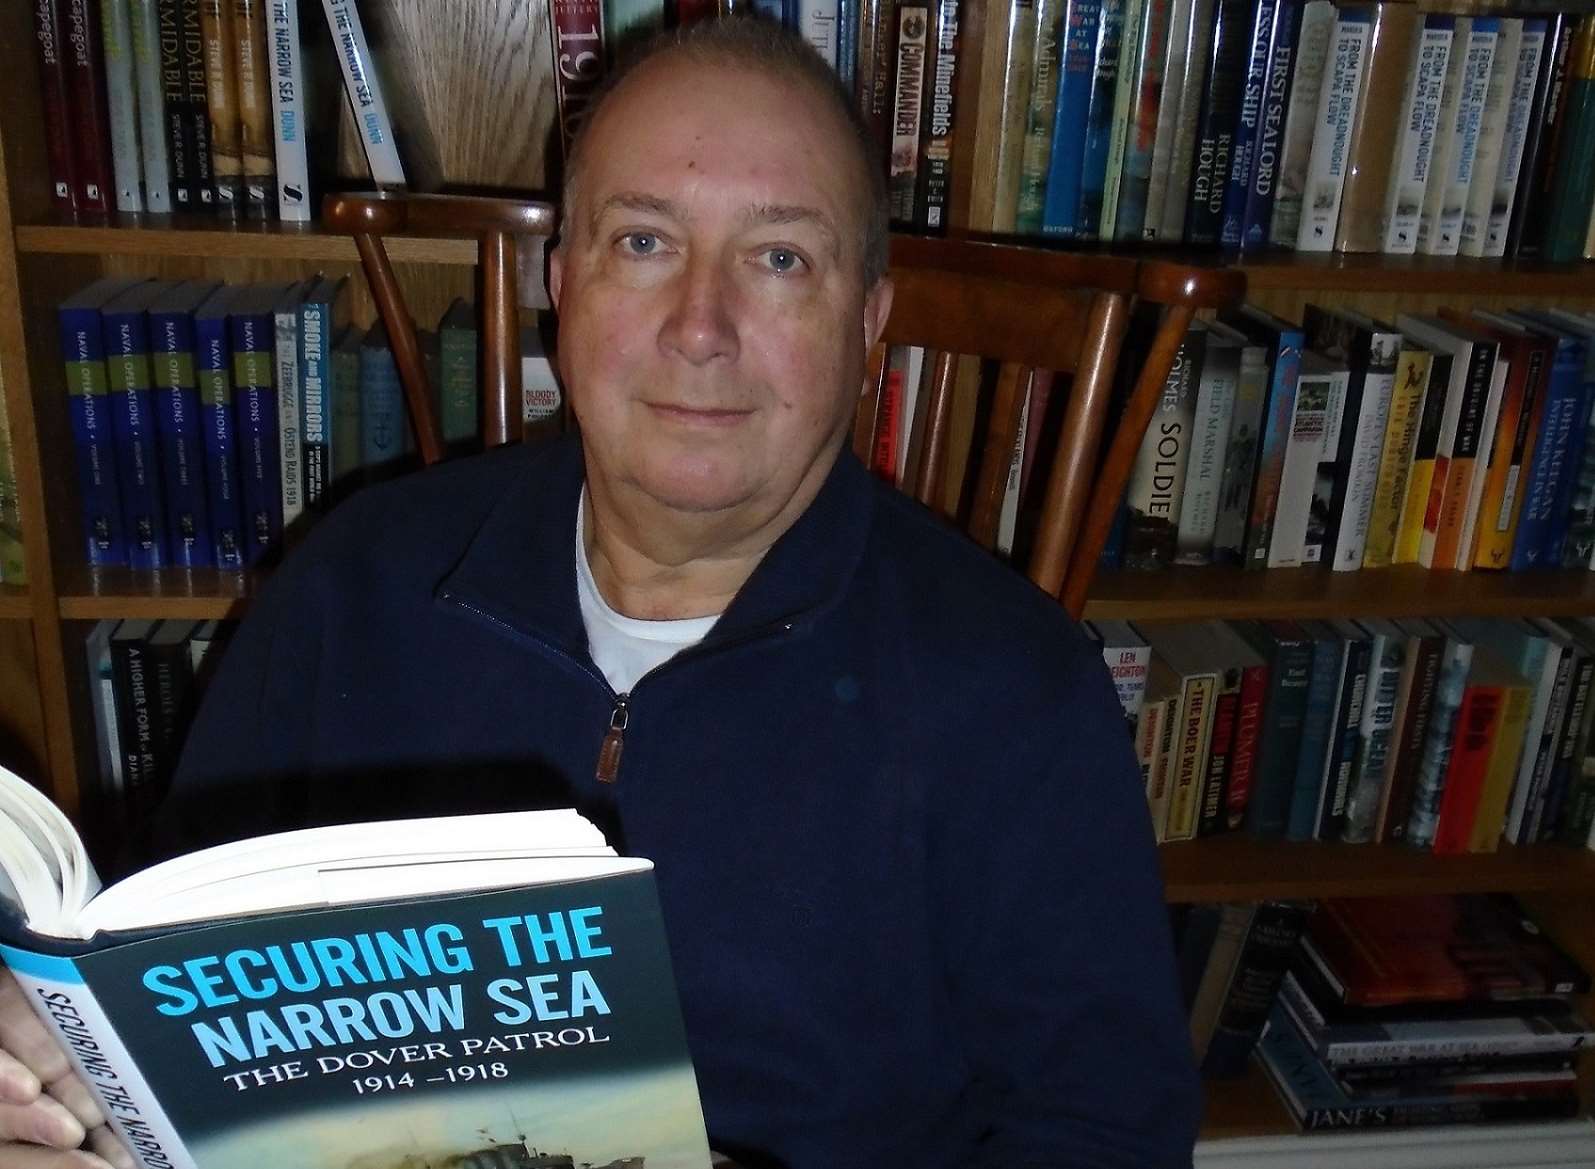 Steve Dunn with his new book Securing the Narrow Sea, about the Dover Patrol from 1914 to 1918